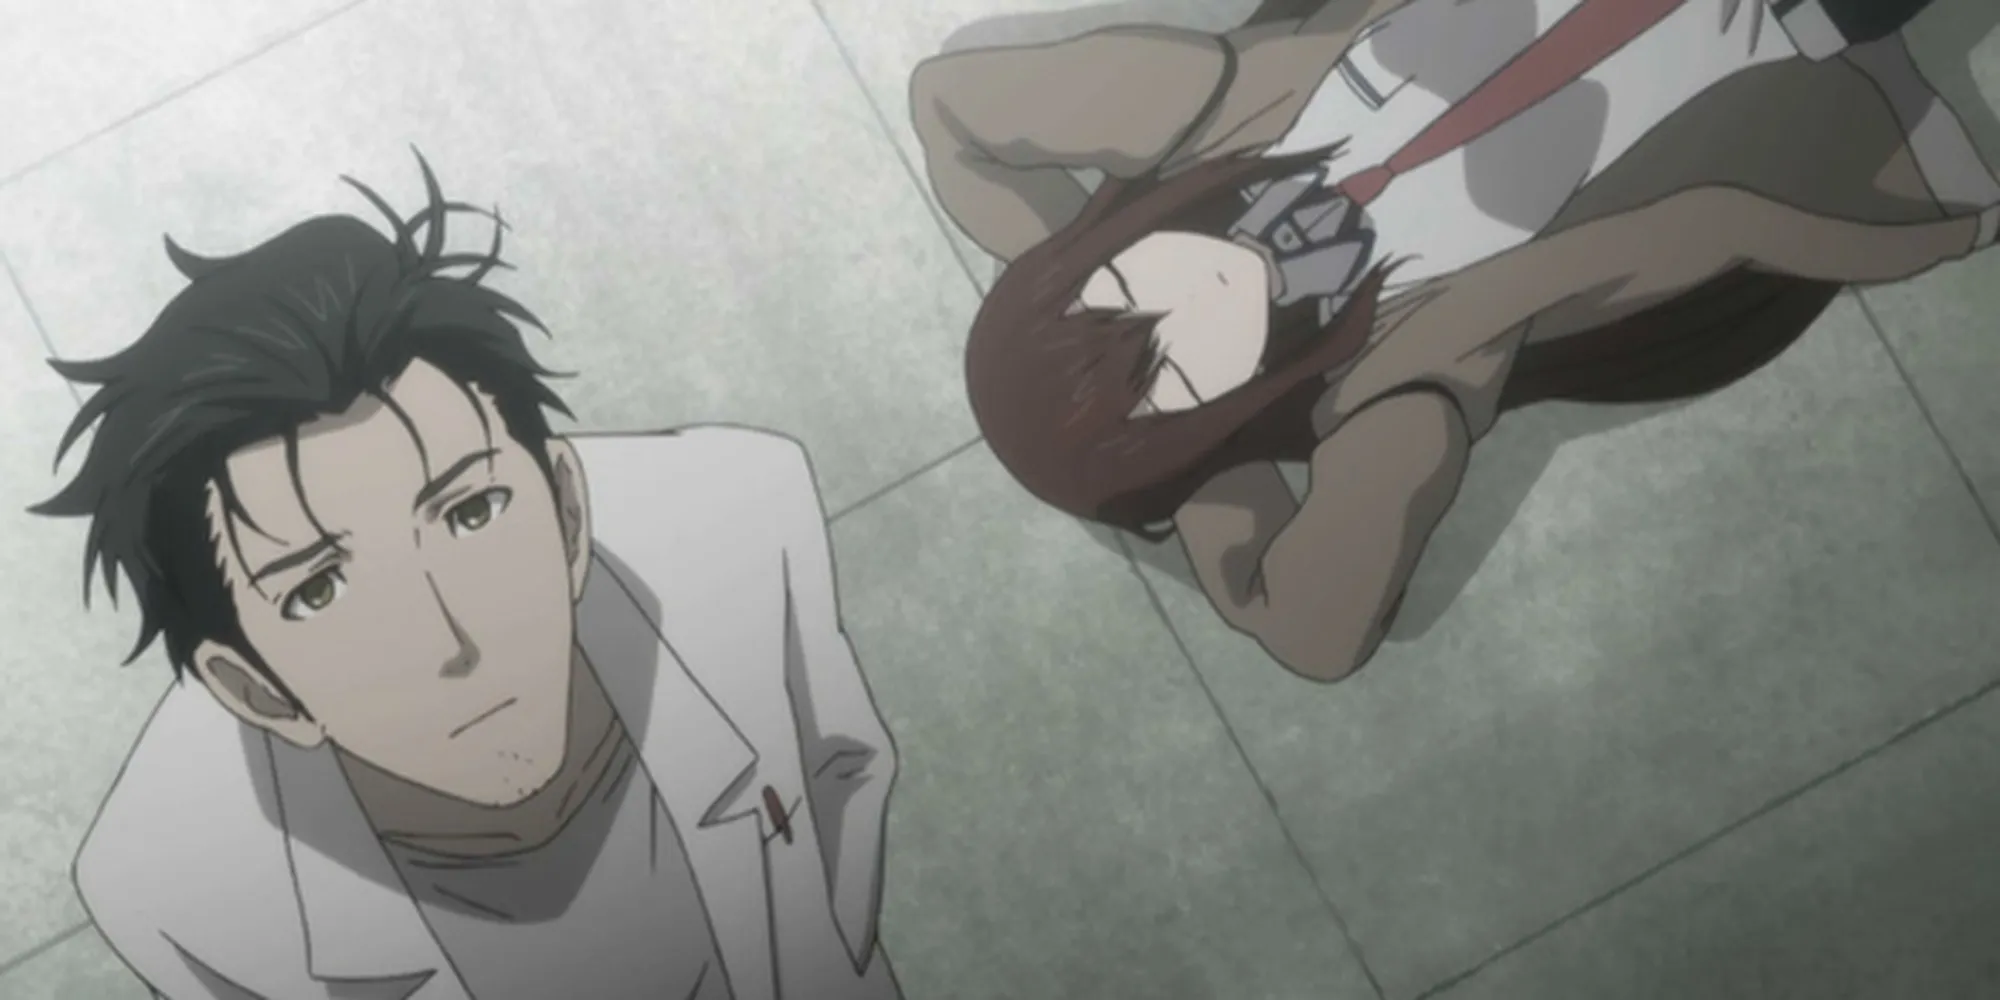 Steins;Gate protagonist Rintaro Okabe with another character